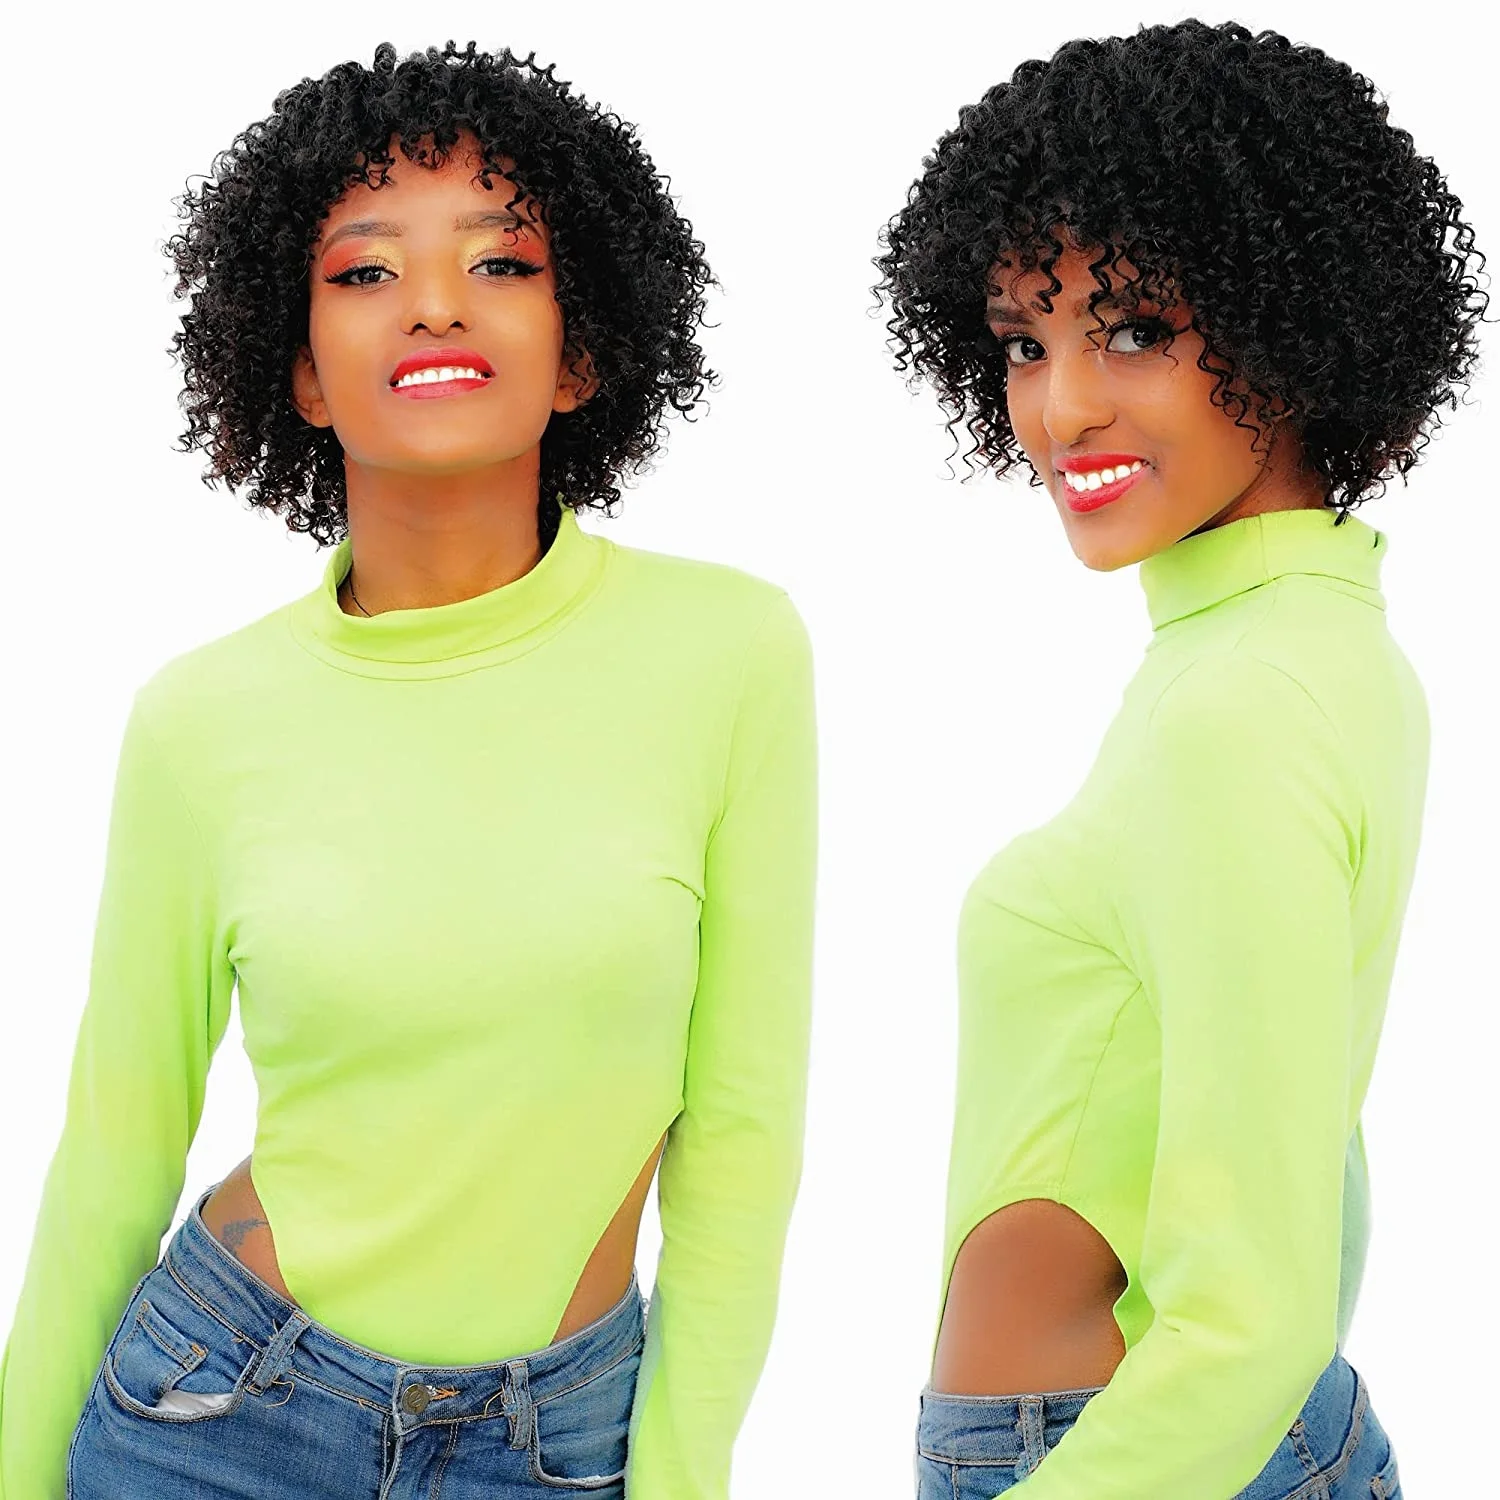 

Short Curly Human Hair Wigs for Black Women Short Kinky Curly Wig with Bang Black Mix Medium Brown Highlights Cheap Machine Wig